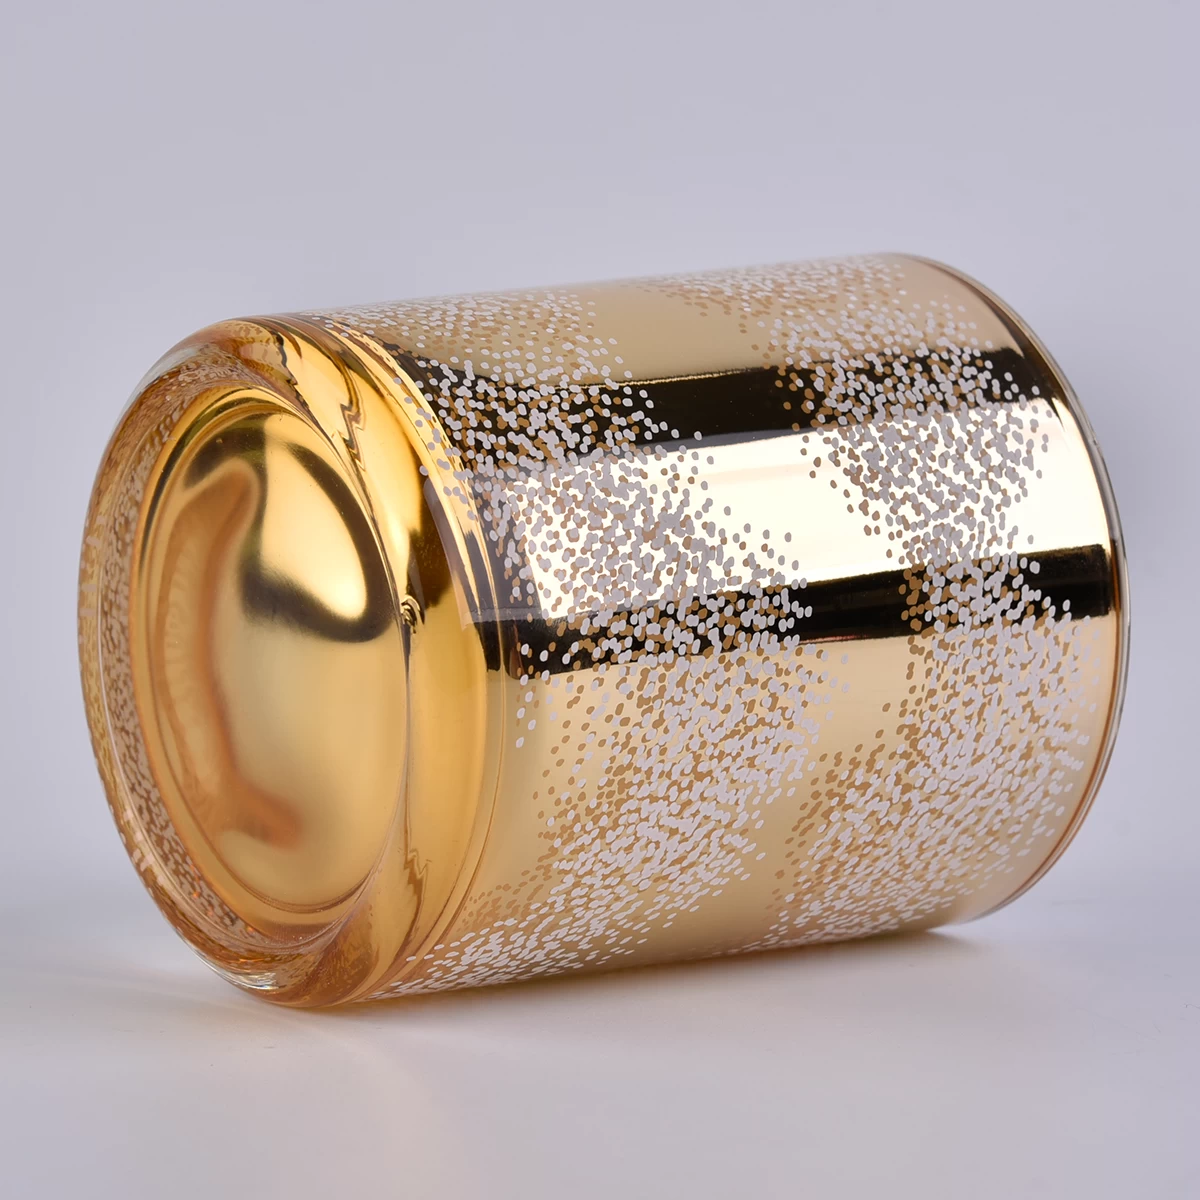 Cylinder gold glass candle jar with white dots prints